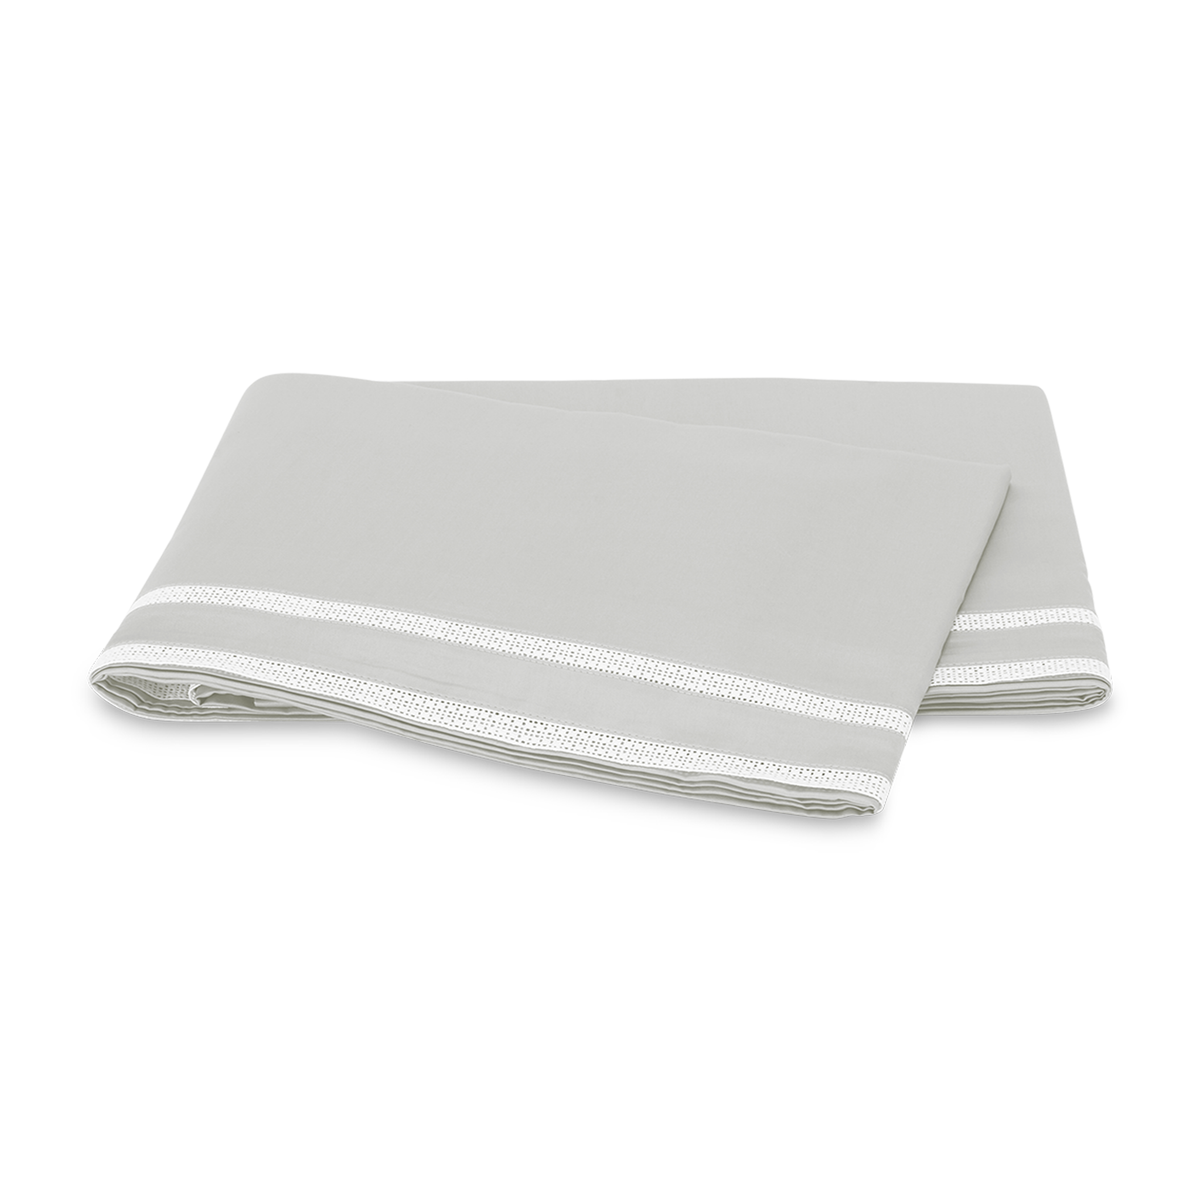 Flat Sheet of Matouk Grace Bedding in Color Silver